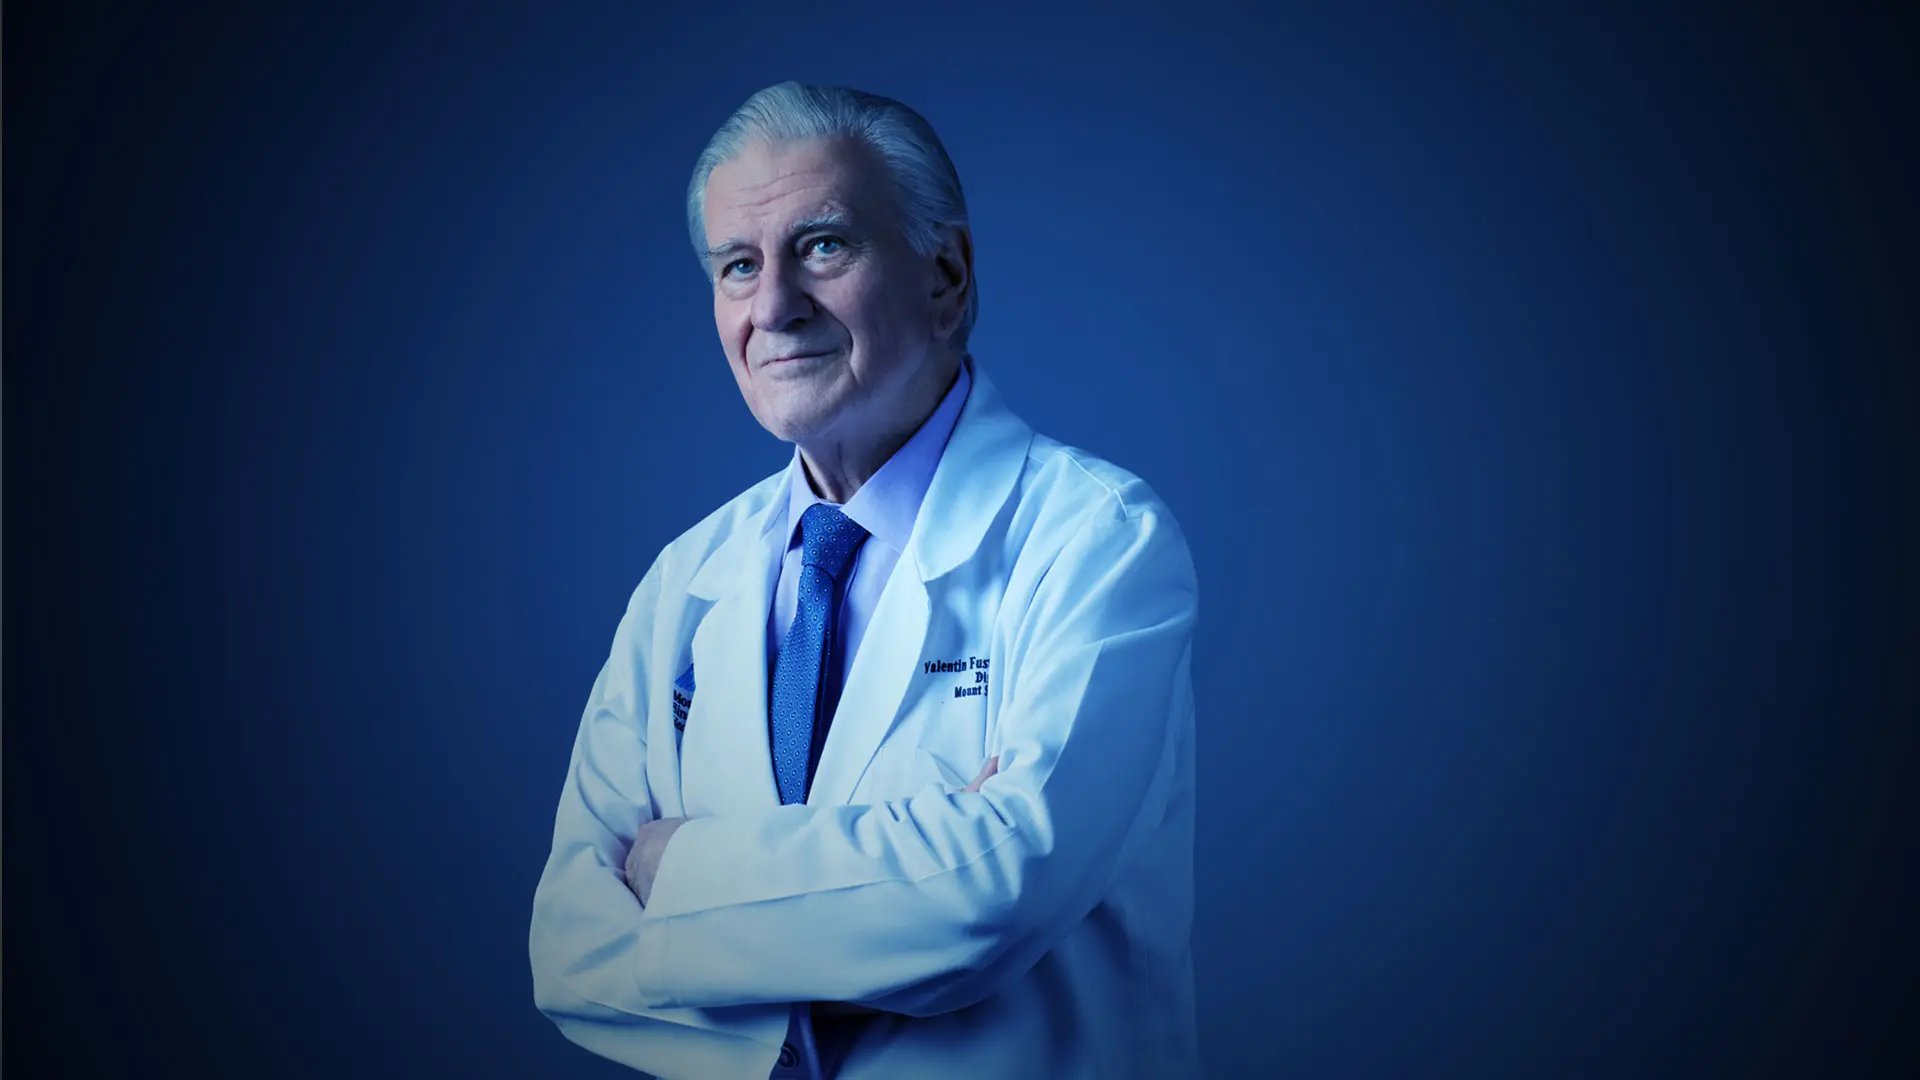 Message From Valentin Fuster, MD, PhD, Director of Mount Sinai Heart